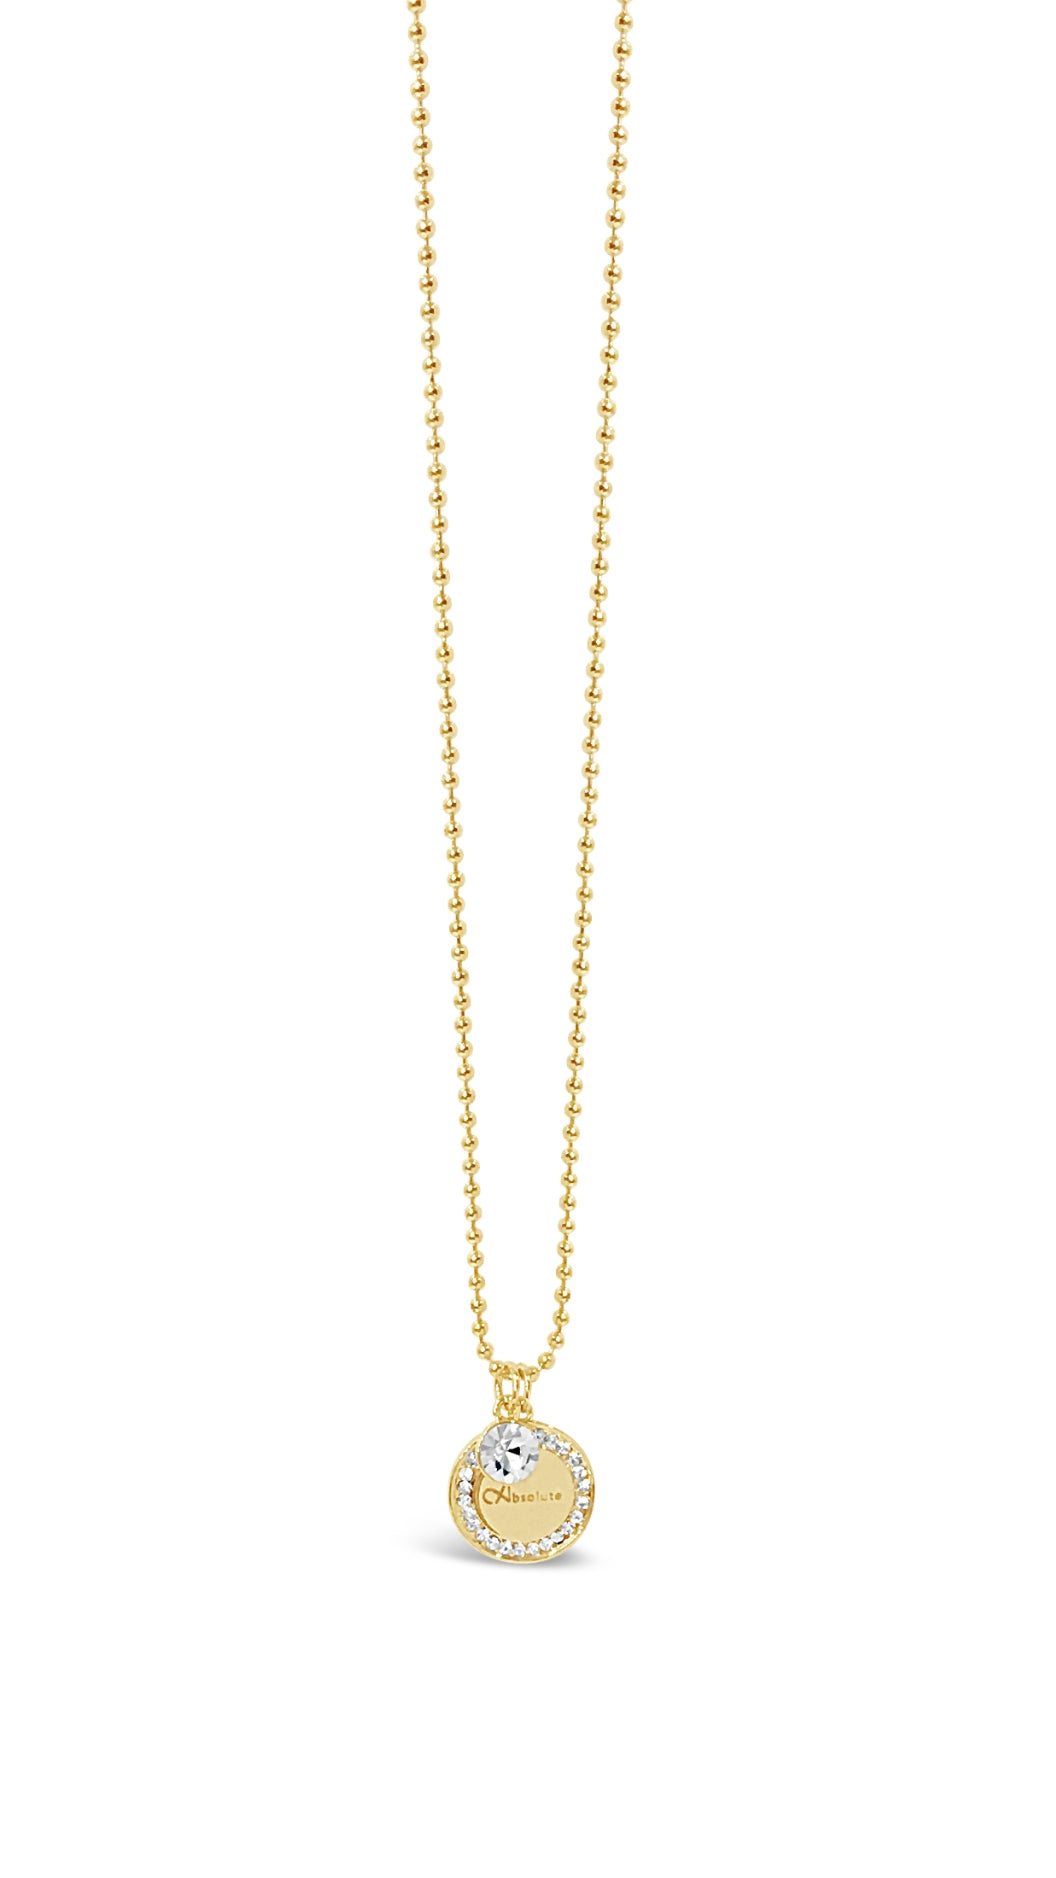 Yellow Gold Plated 'Absolute' Pendant & Chain